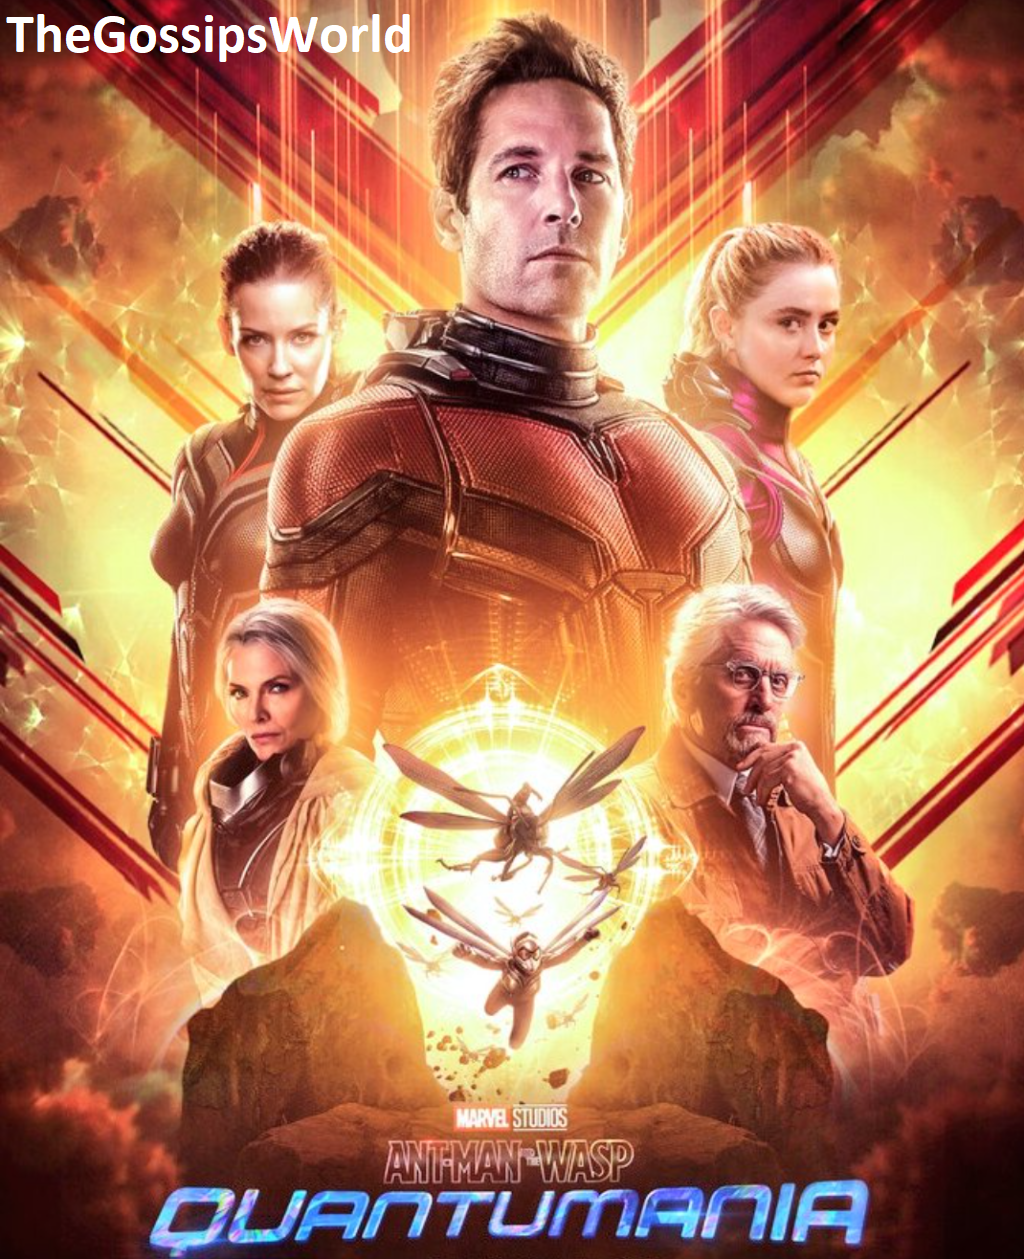 Will Antman Die In Quantumania?